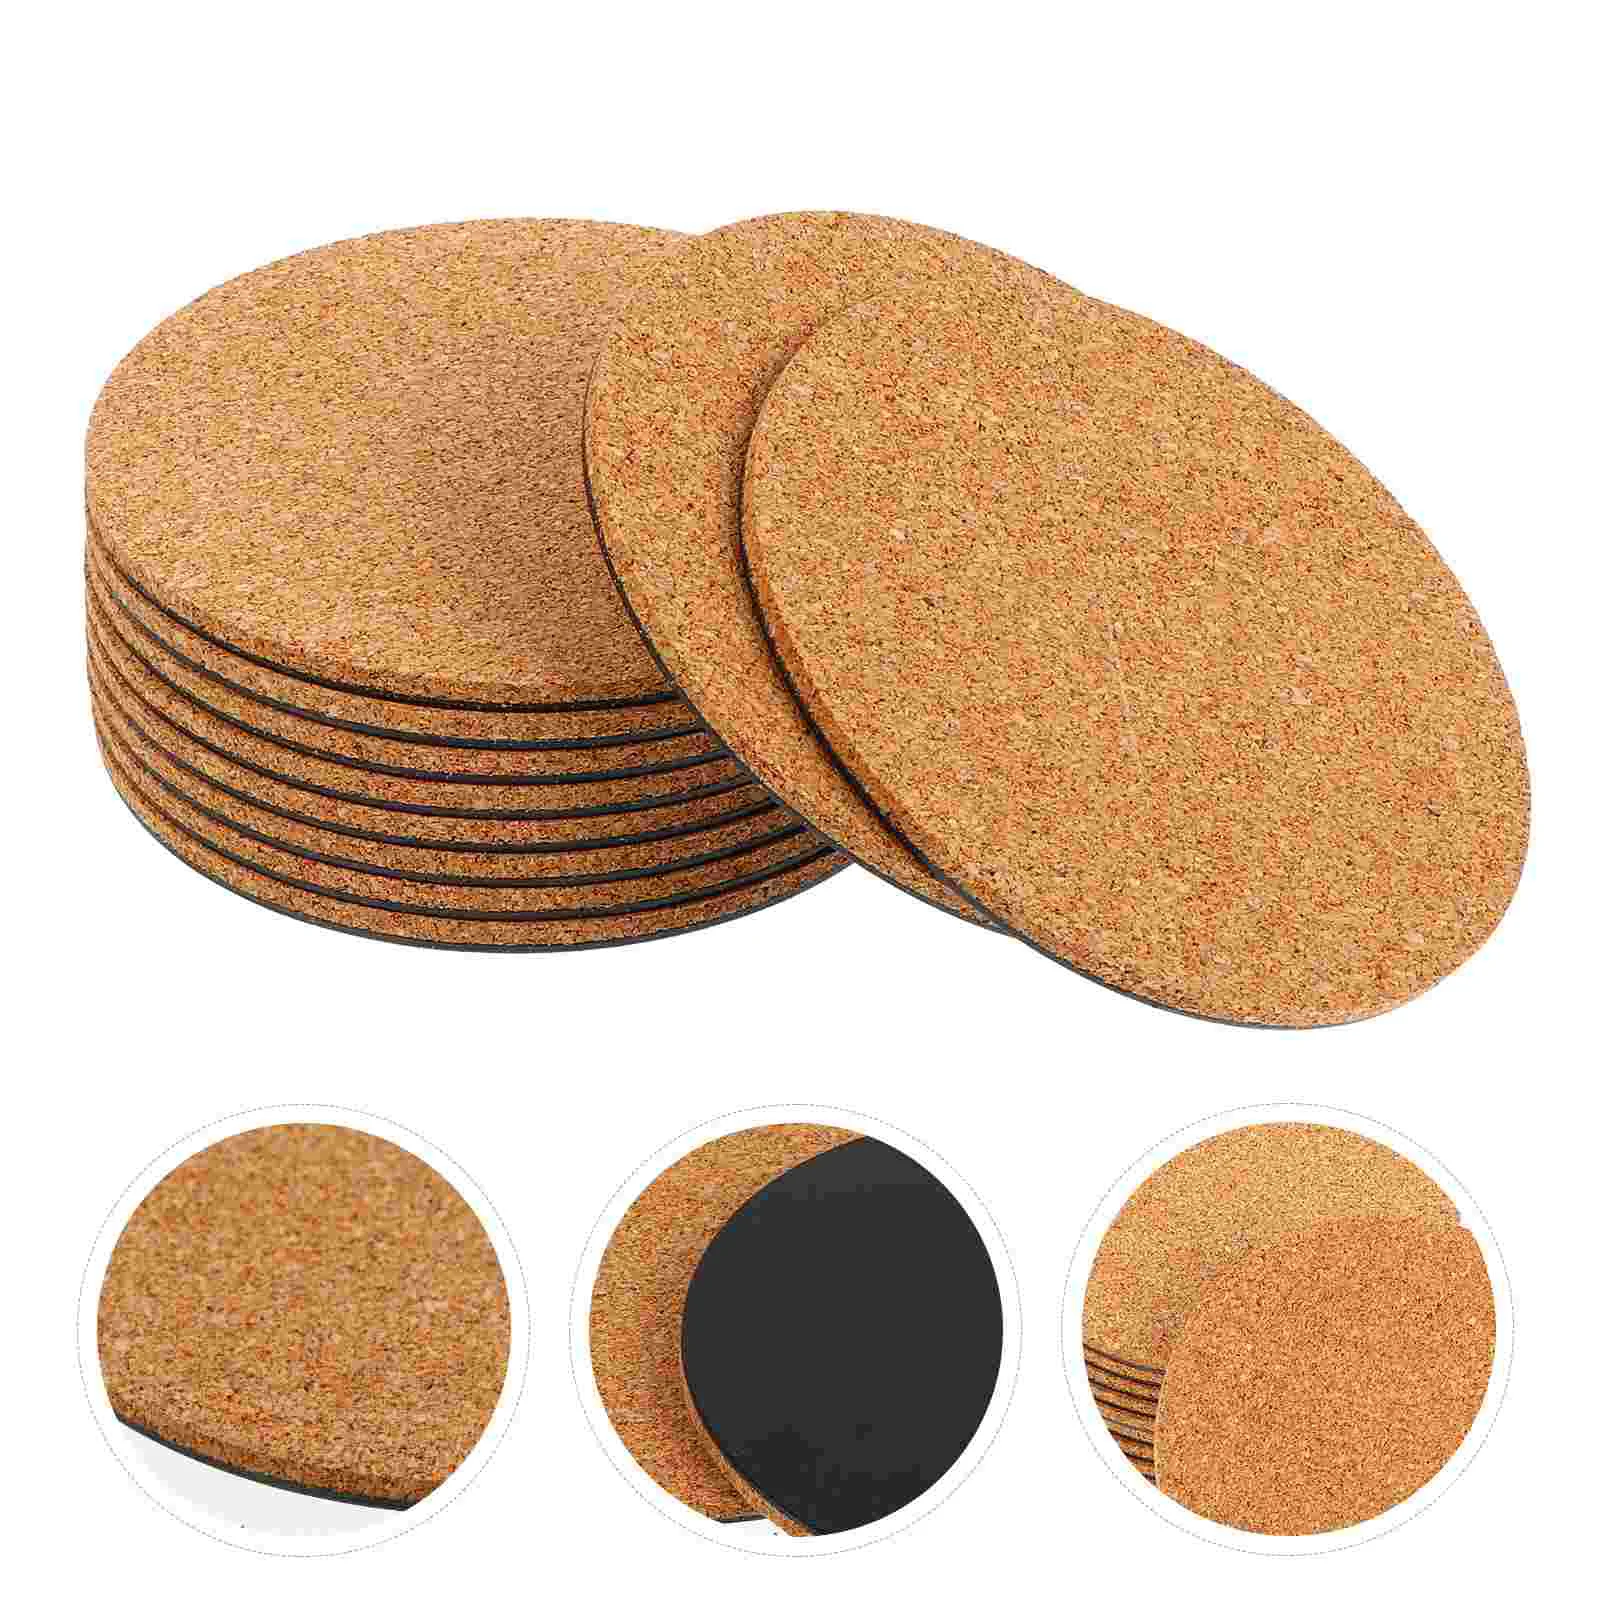 

10pcs Cork Coaster Round Cork Mats Cork Trivets Dishes Wooden Coasters Absorbent Table Board for Garden Home Bar